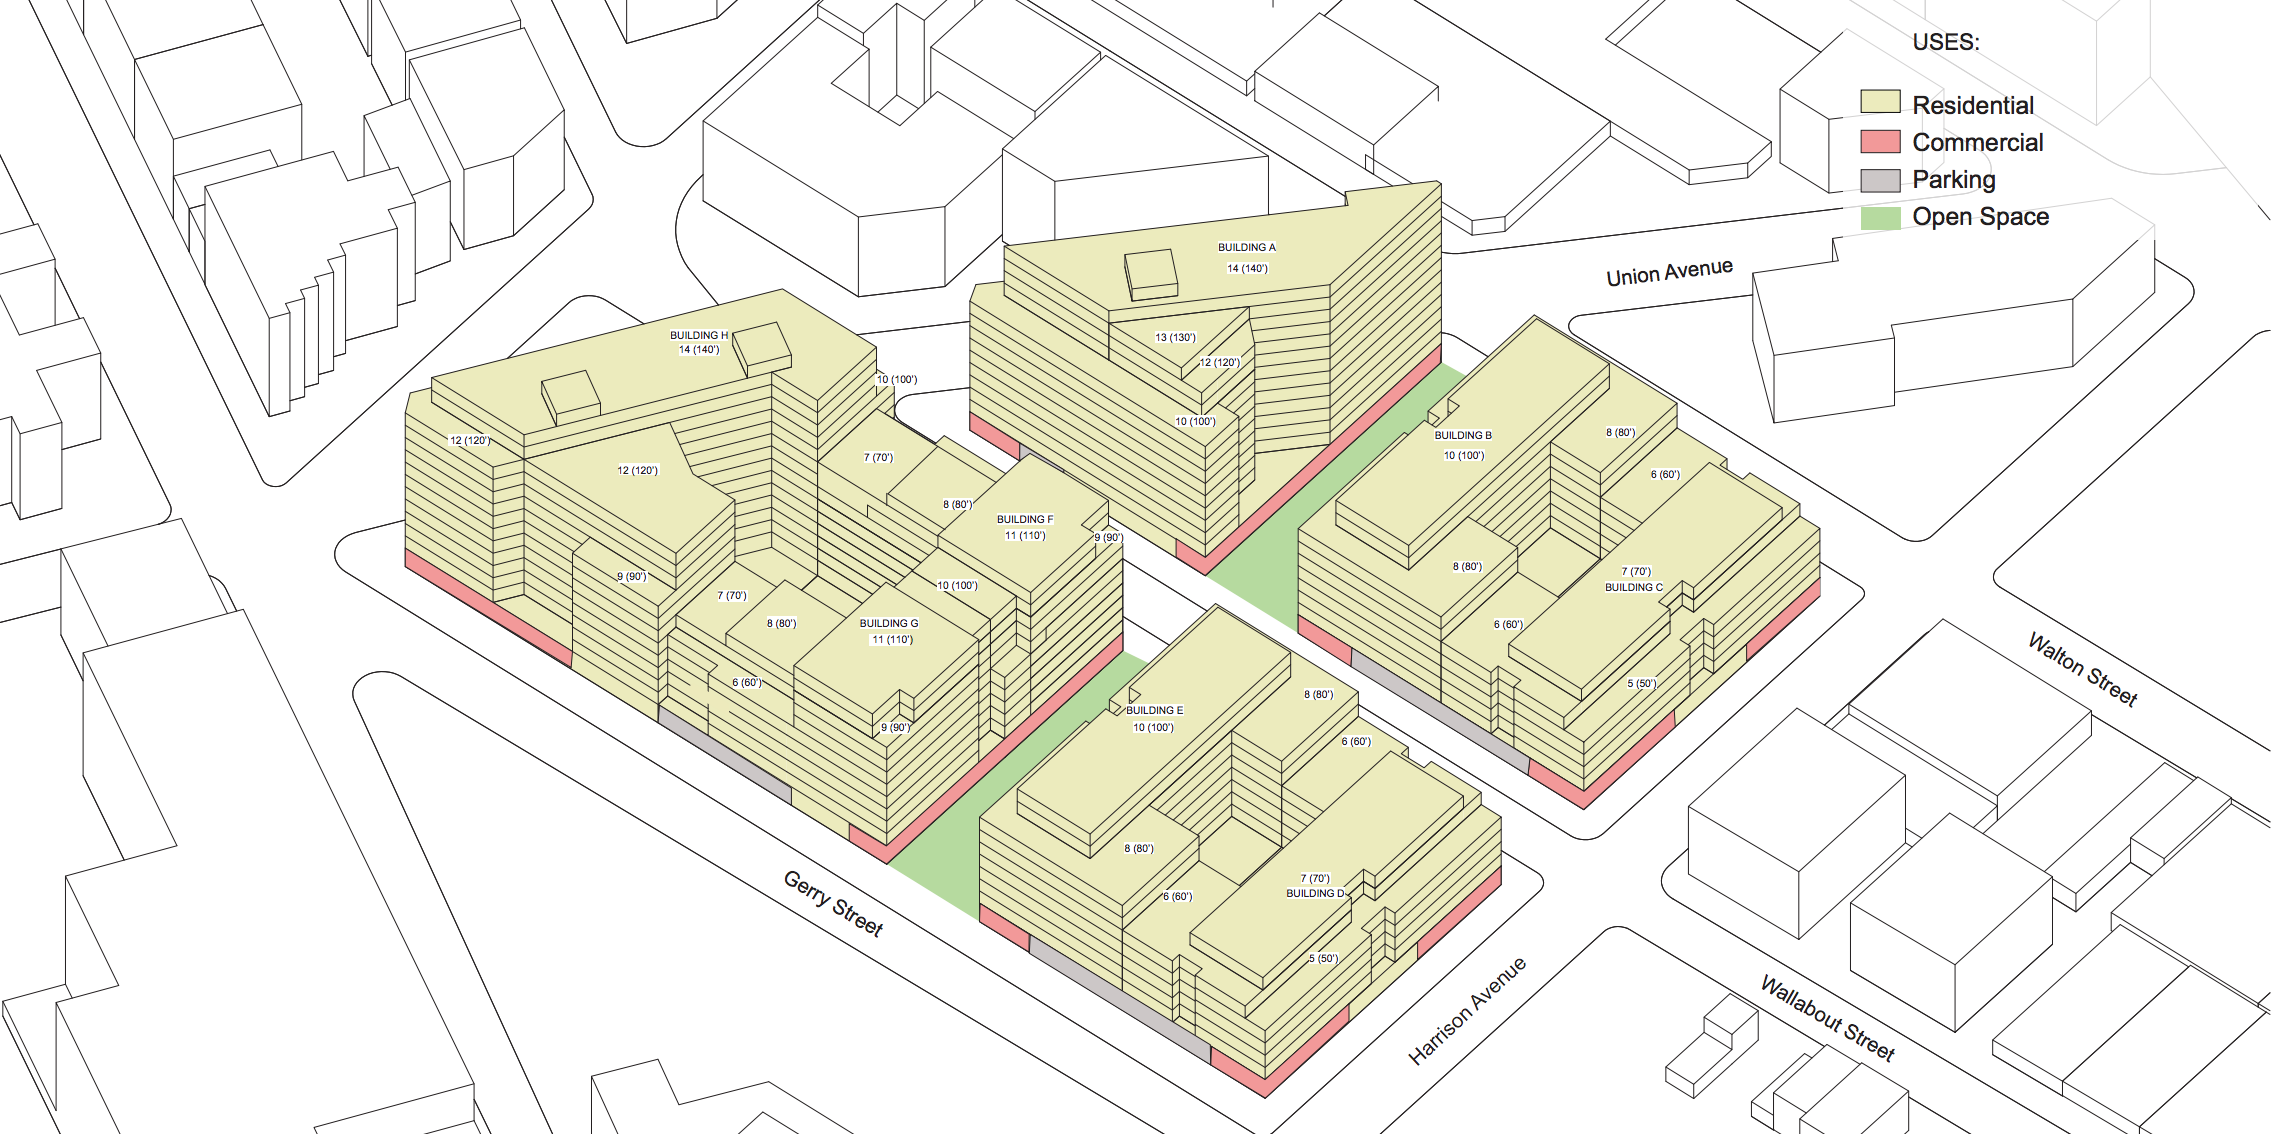 Proposed Broadway Triangle rezoning, via DCP